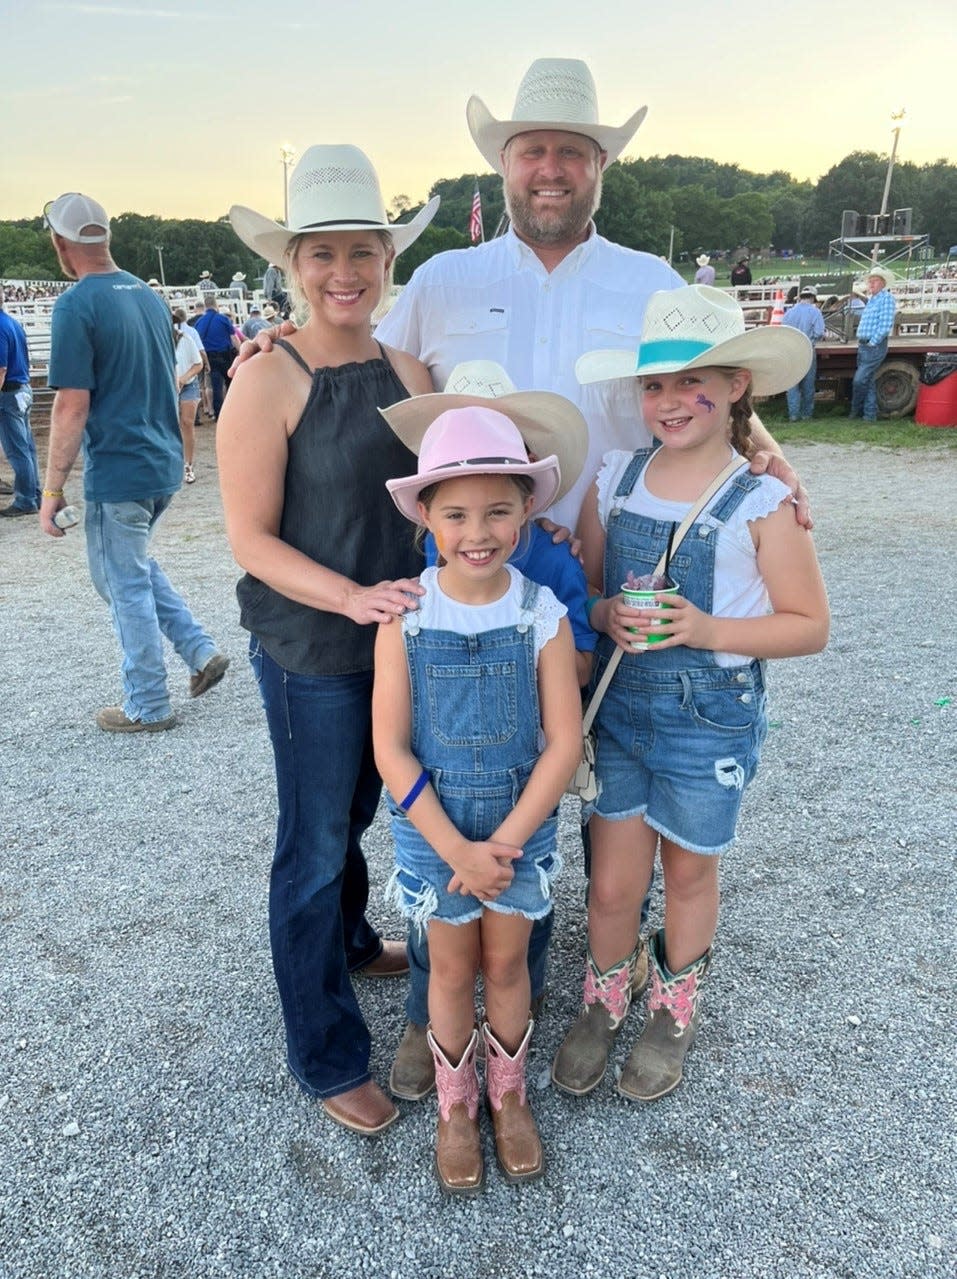 Trevor and Haverly Pennington enjoy the rodeo with their children Baeu, 7, Hattie Anne, 8, and friend Collie Schmidt, 7, at Maury County Park on July 15, 2023 in Columbia, Tenn.